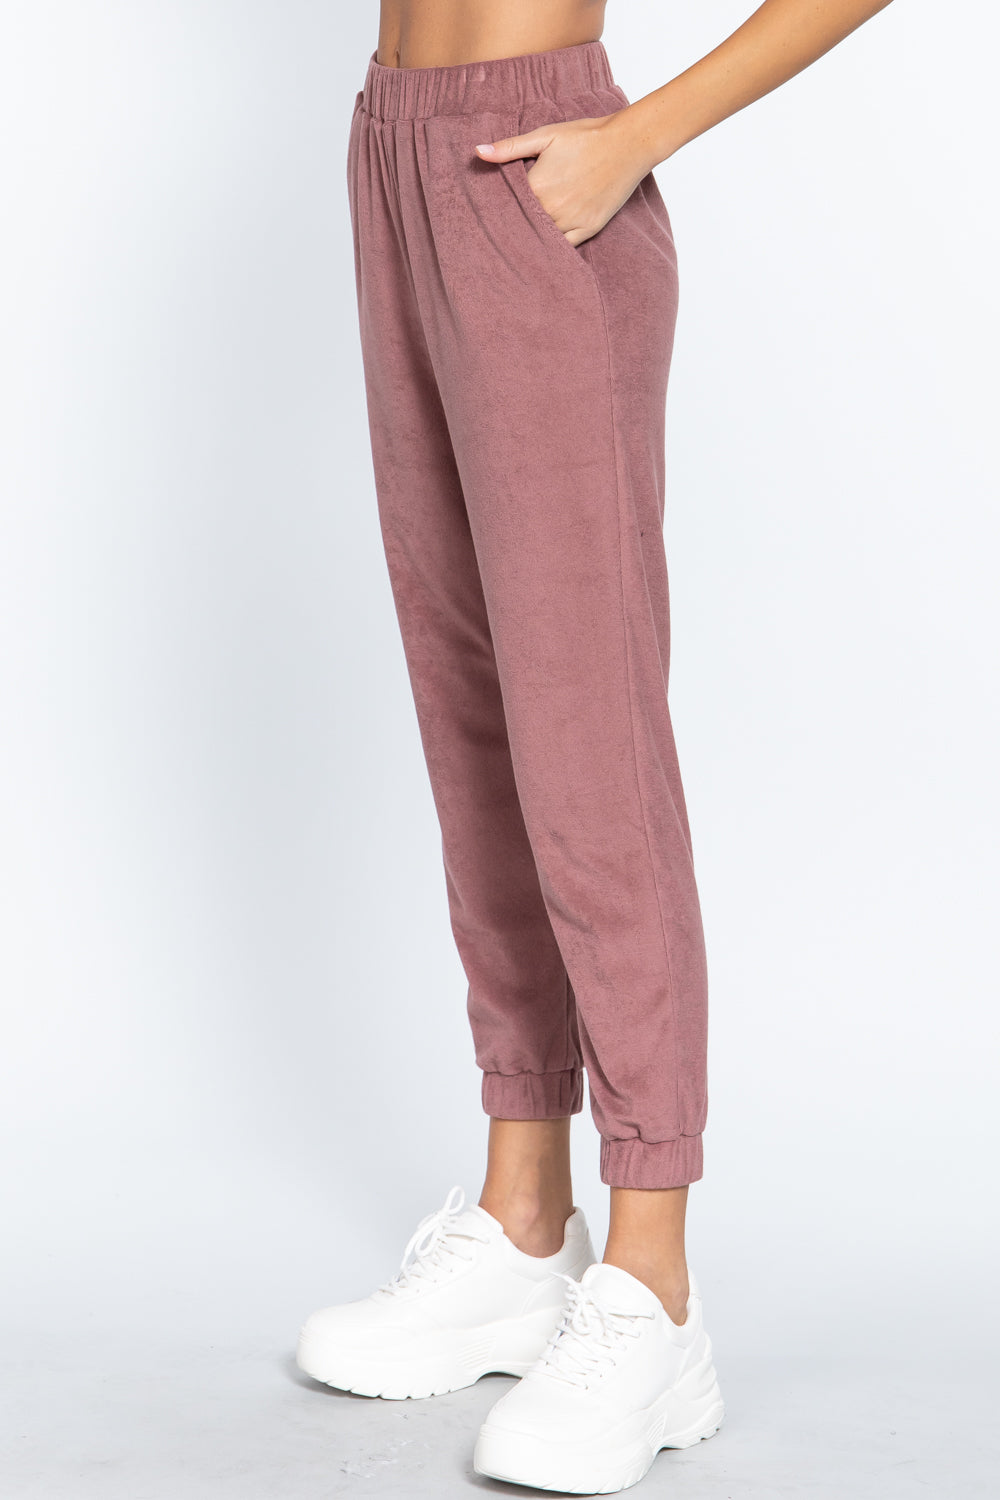 Terry Towelling Long Jogger Pants